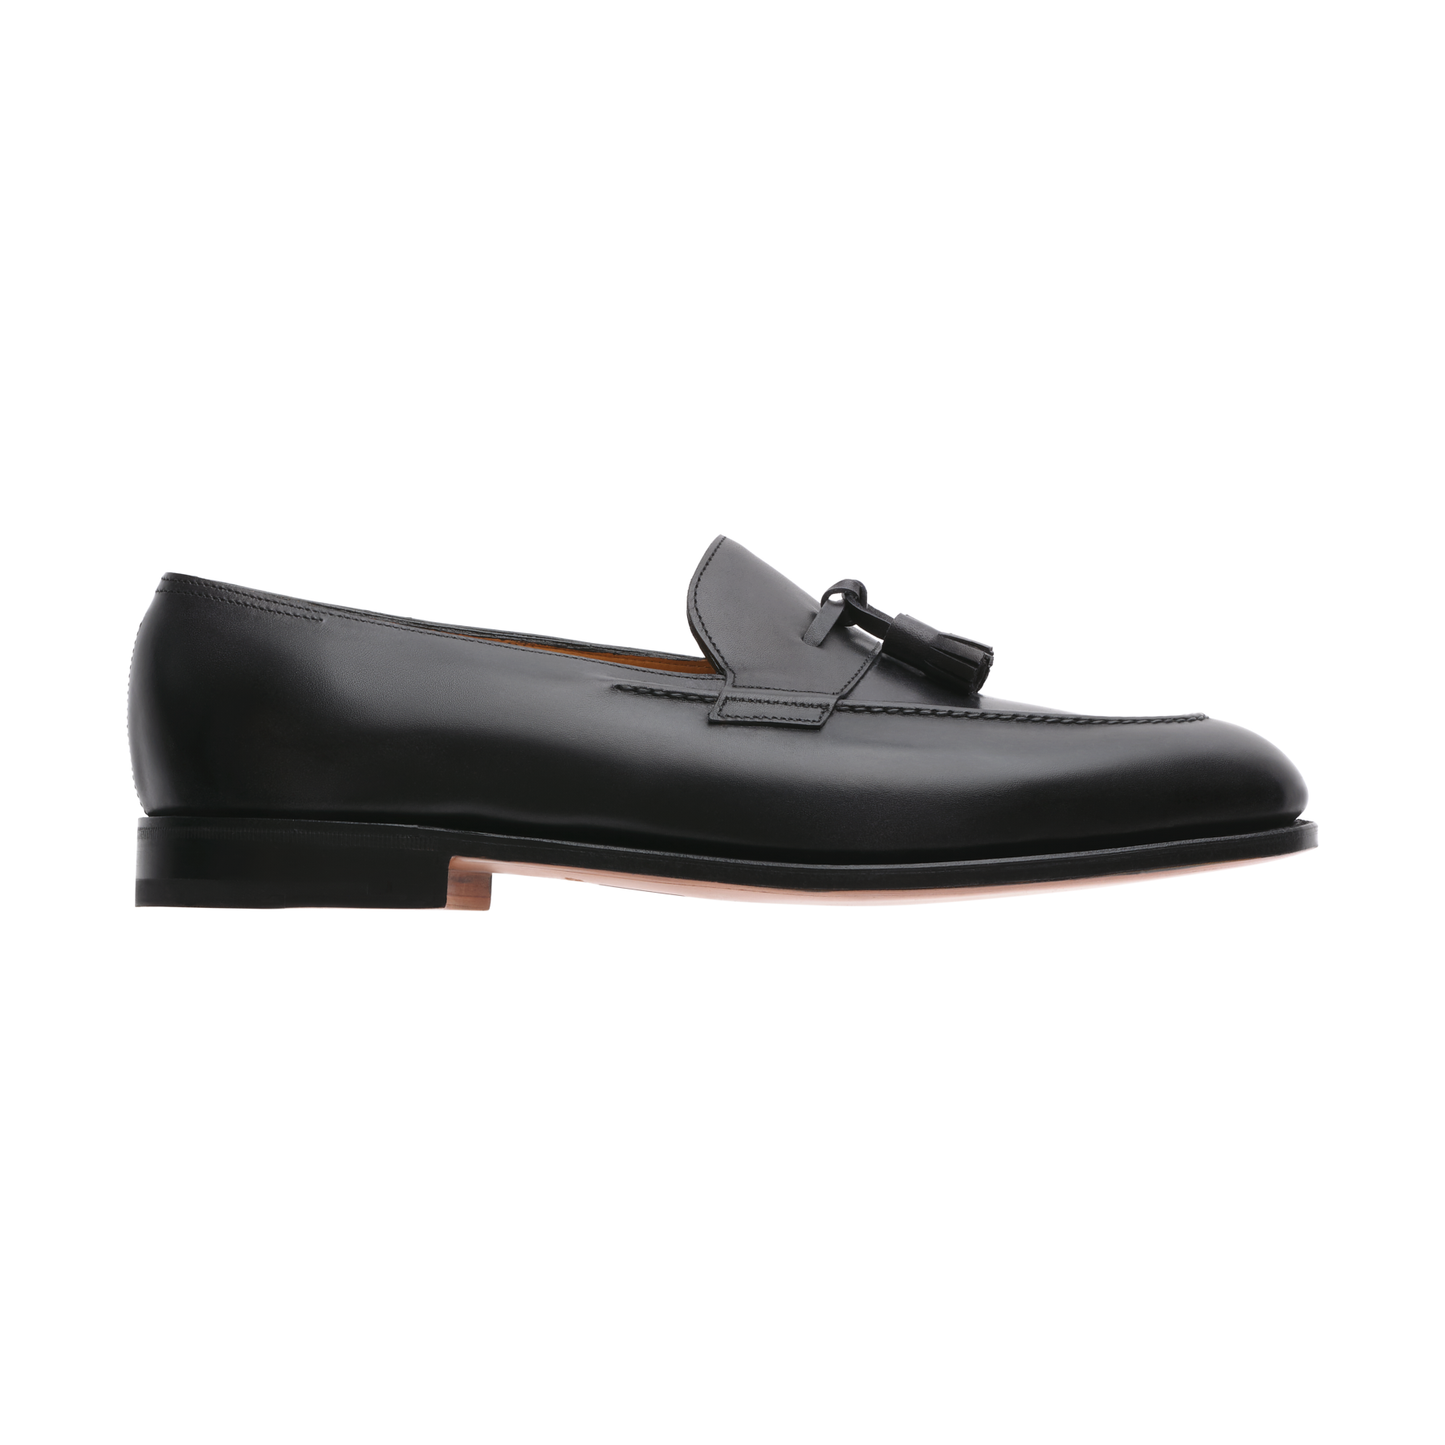 John Lobb "Callington" Leather Loafer with Hand-Stitched Apron in Black - SARTALE